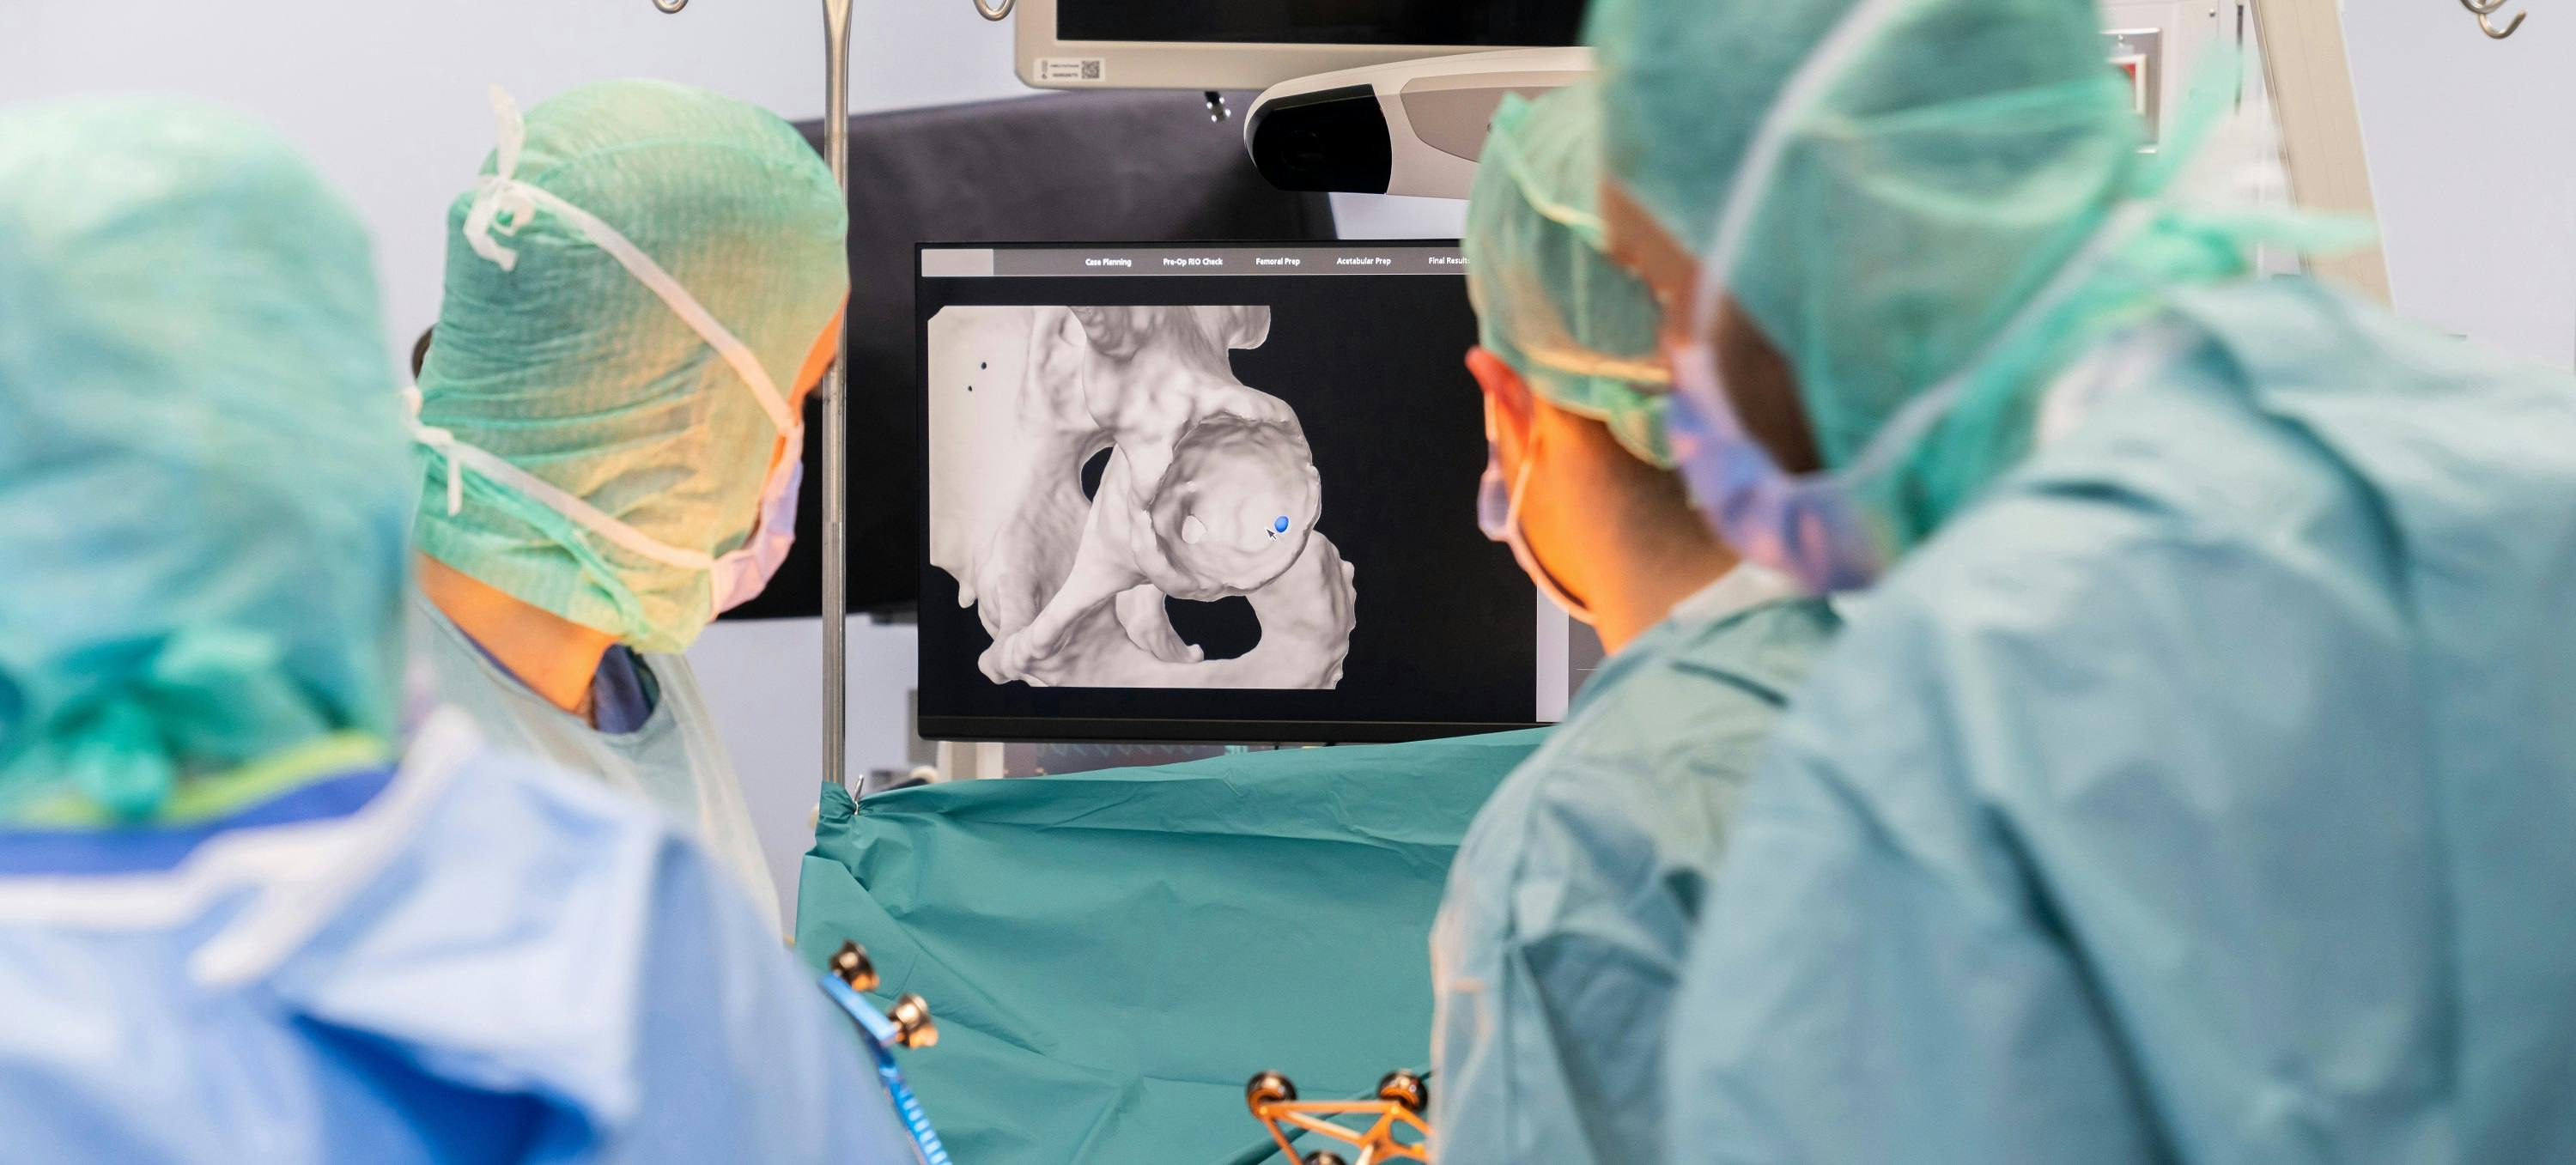 Doctors look at 3D medical imaging during an operation.